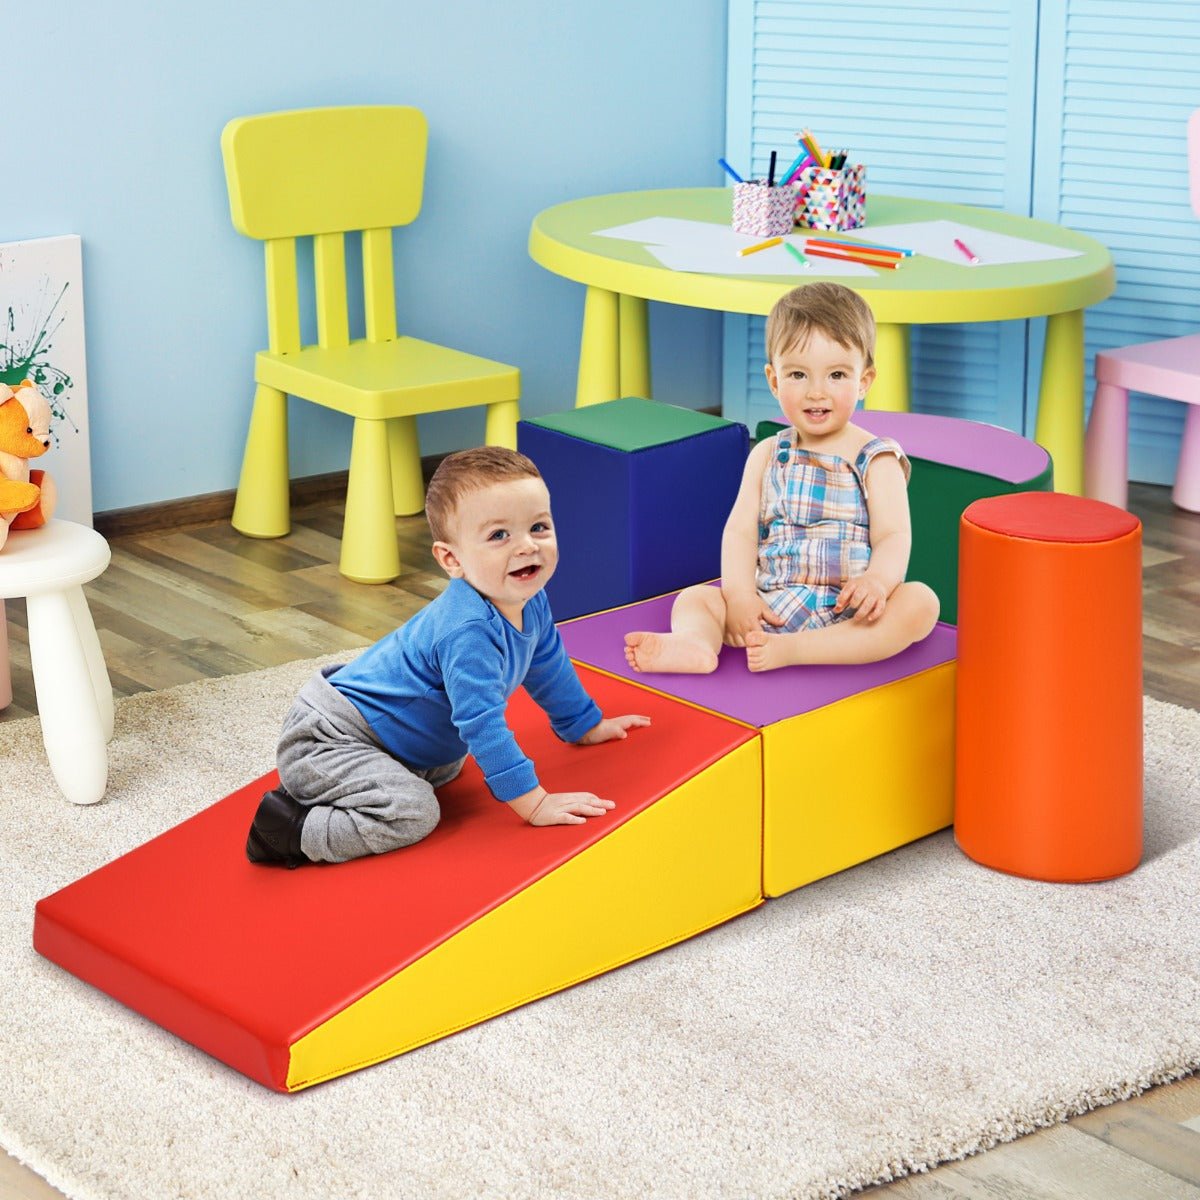 Foam Shapes Playset for Toddlers - Encourages Active Play and Exploration